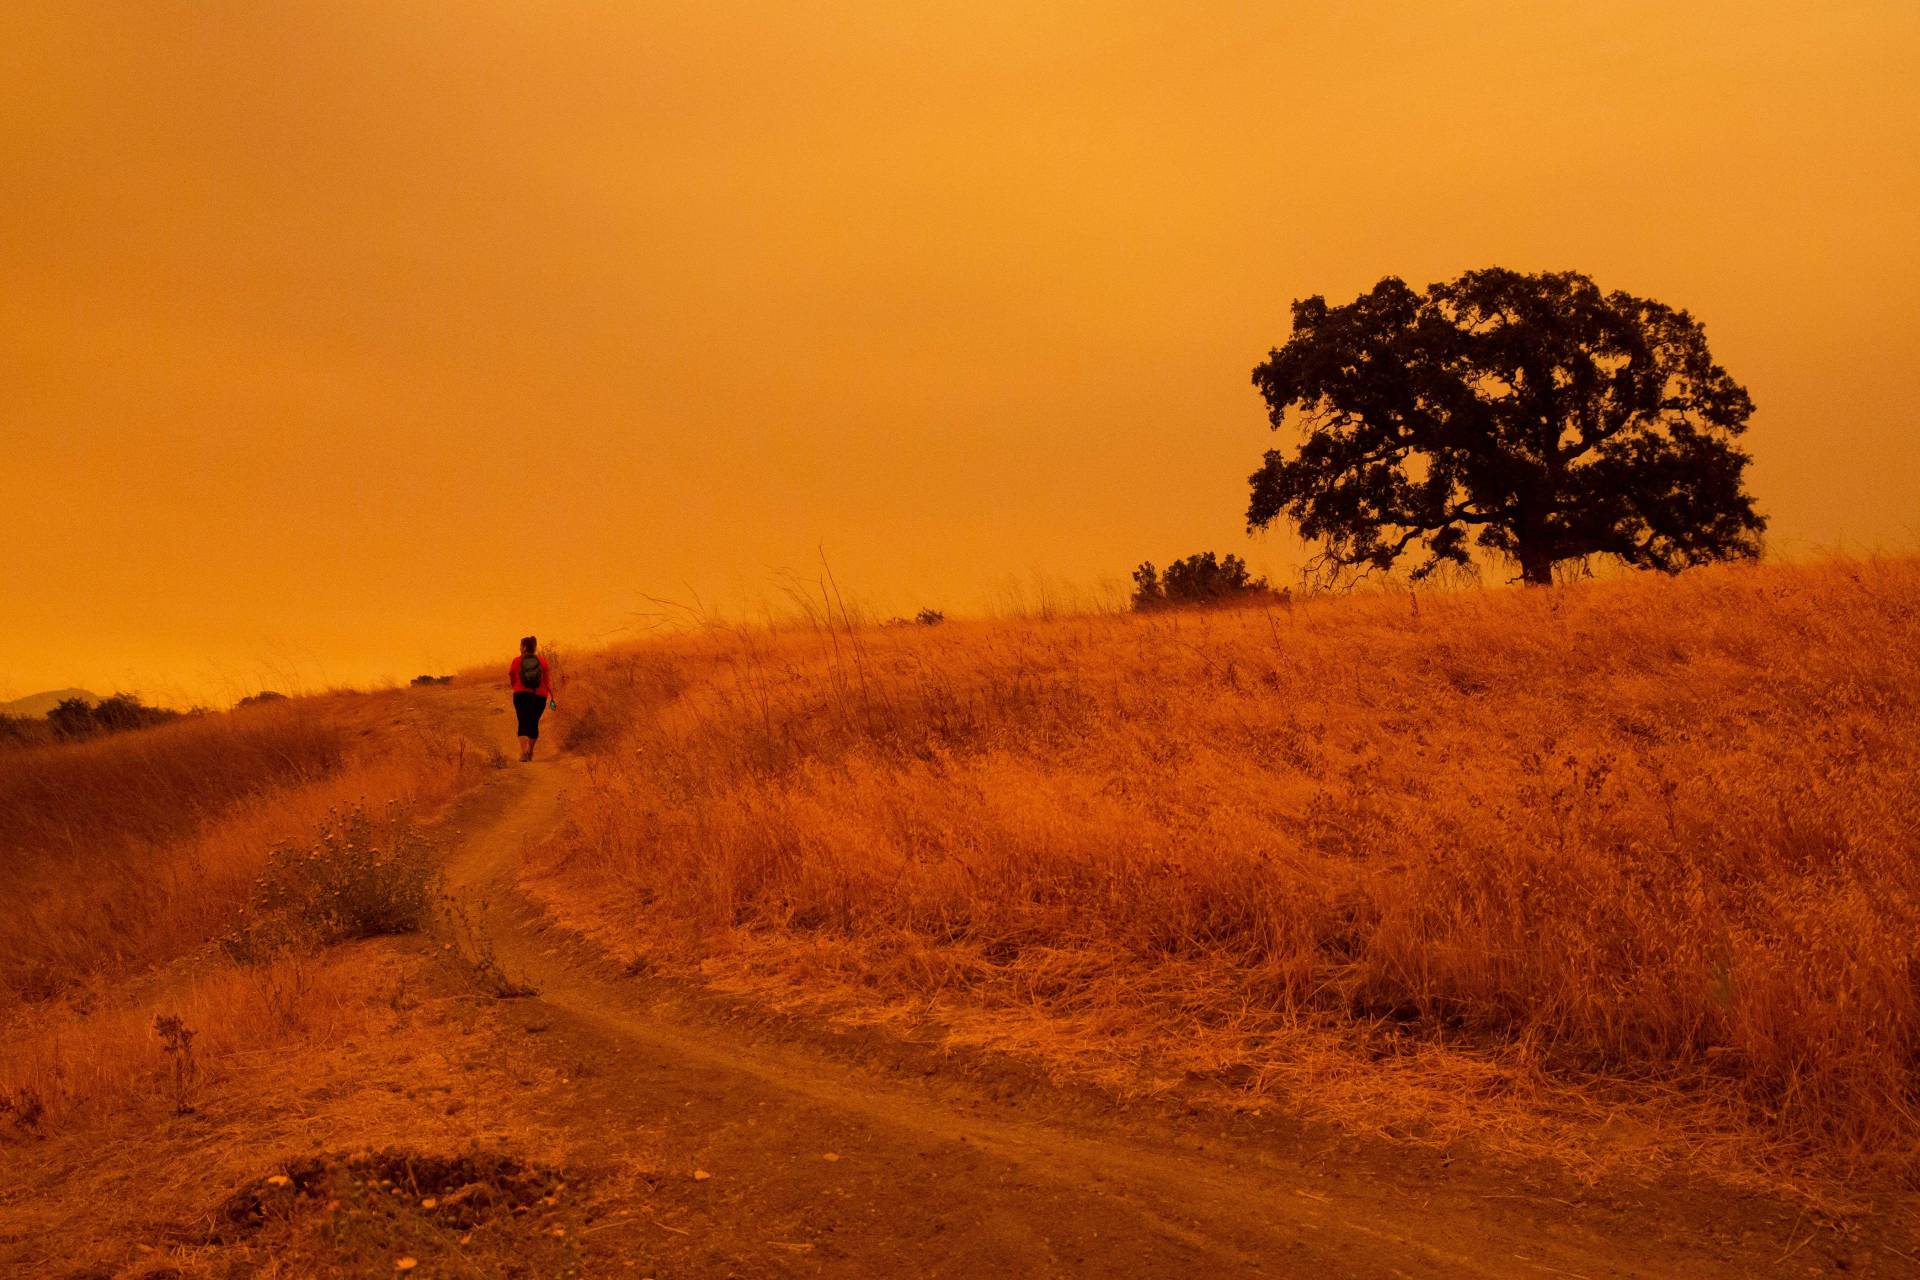 A hiker walks below an orange sky filled with wildfire smoke on the Limeridge Open Space hiking trails in Concord, California on September 9, 2020. Dangerous dry winds whipped up California's record-breaking wildfires and ignited new blazes, as hundreds were evacuated by helicopter. Brittany Hosea-Small/AFP/Getty Images